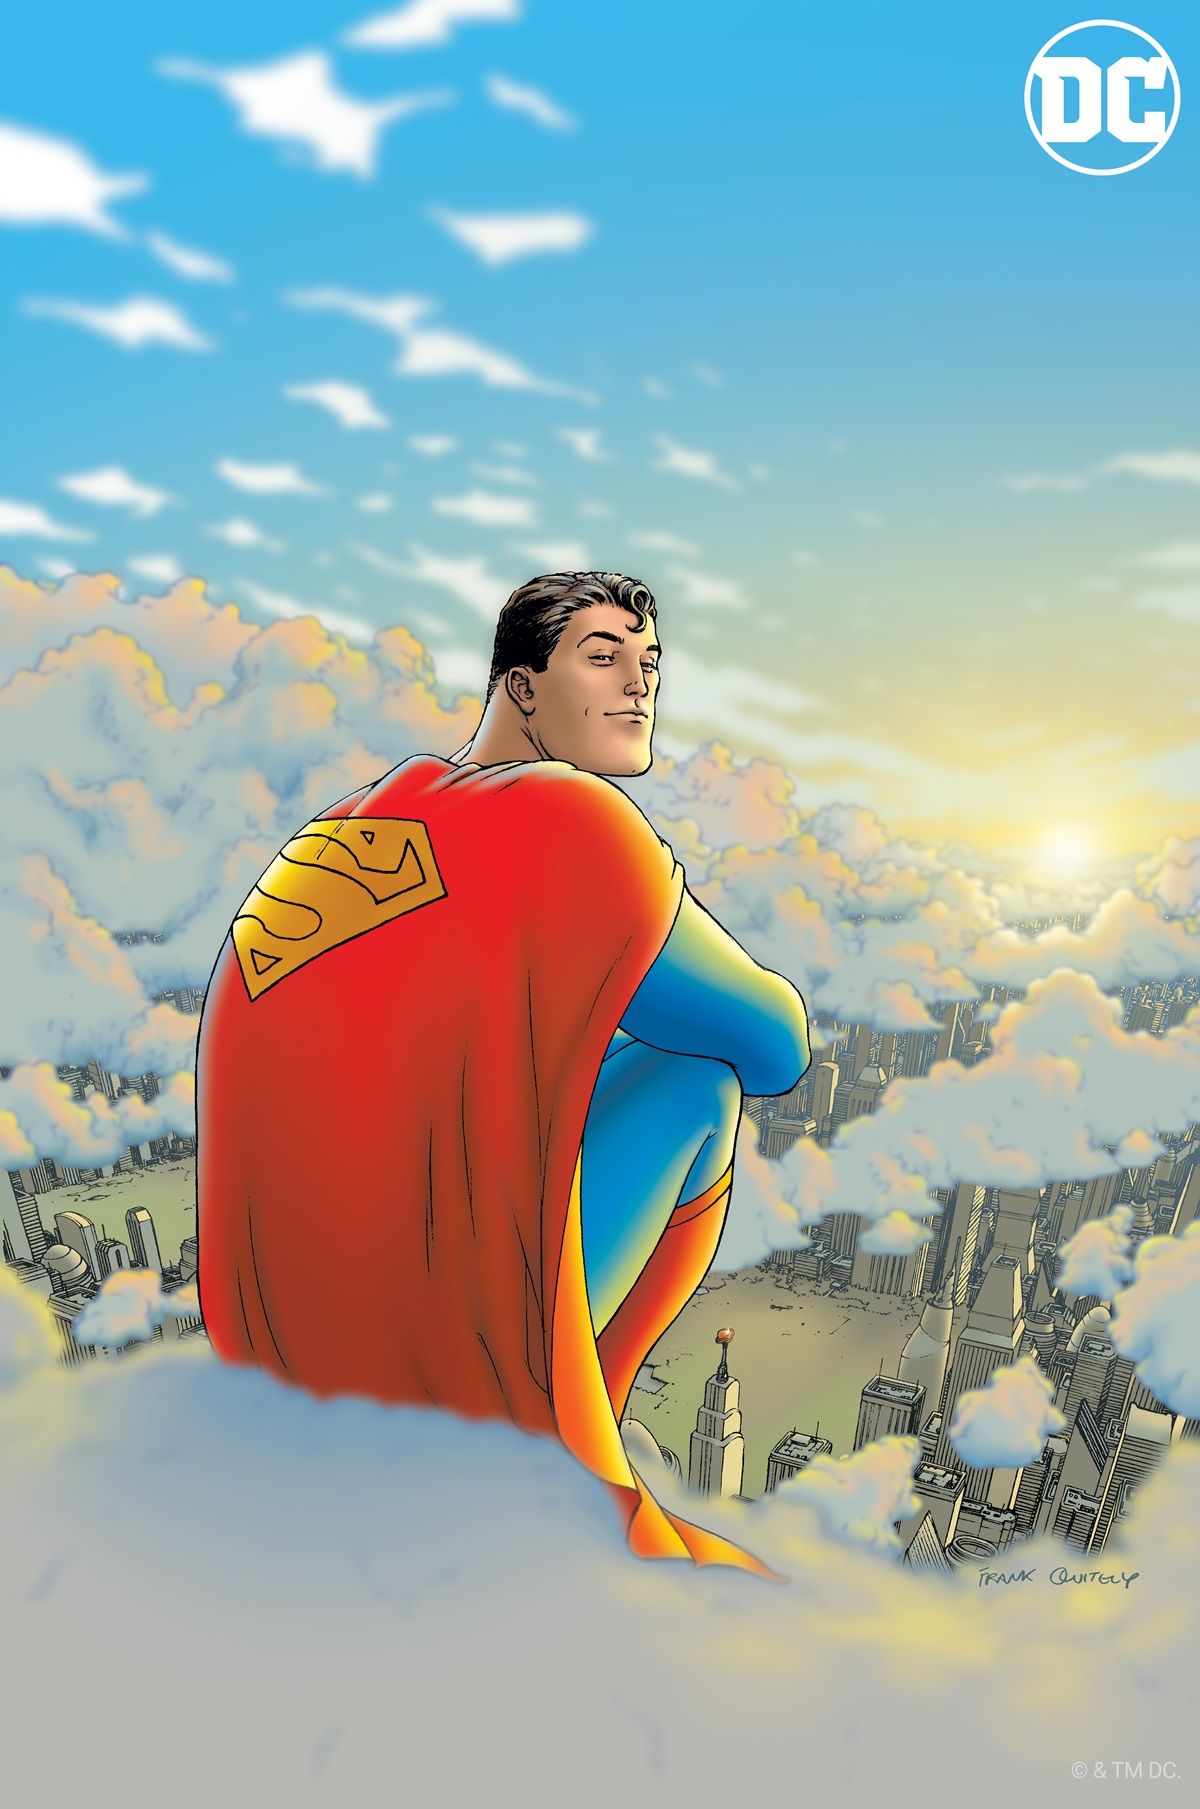 ADVENTURES OF SUPERMAN #628 COVER ( 2004, MATT WAGNER ) FULL COLOR  RENDERING & ICONIC POSE, in ComicLINK.Com Auctions's CLOSED FEATURED  AUCTION HIGHLIGHTS - 02/2017 Comic Art Gallery Room